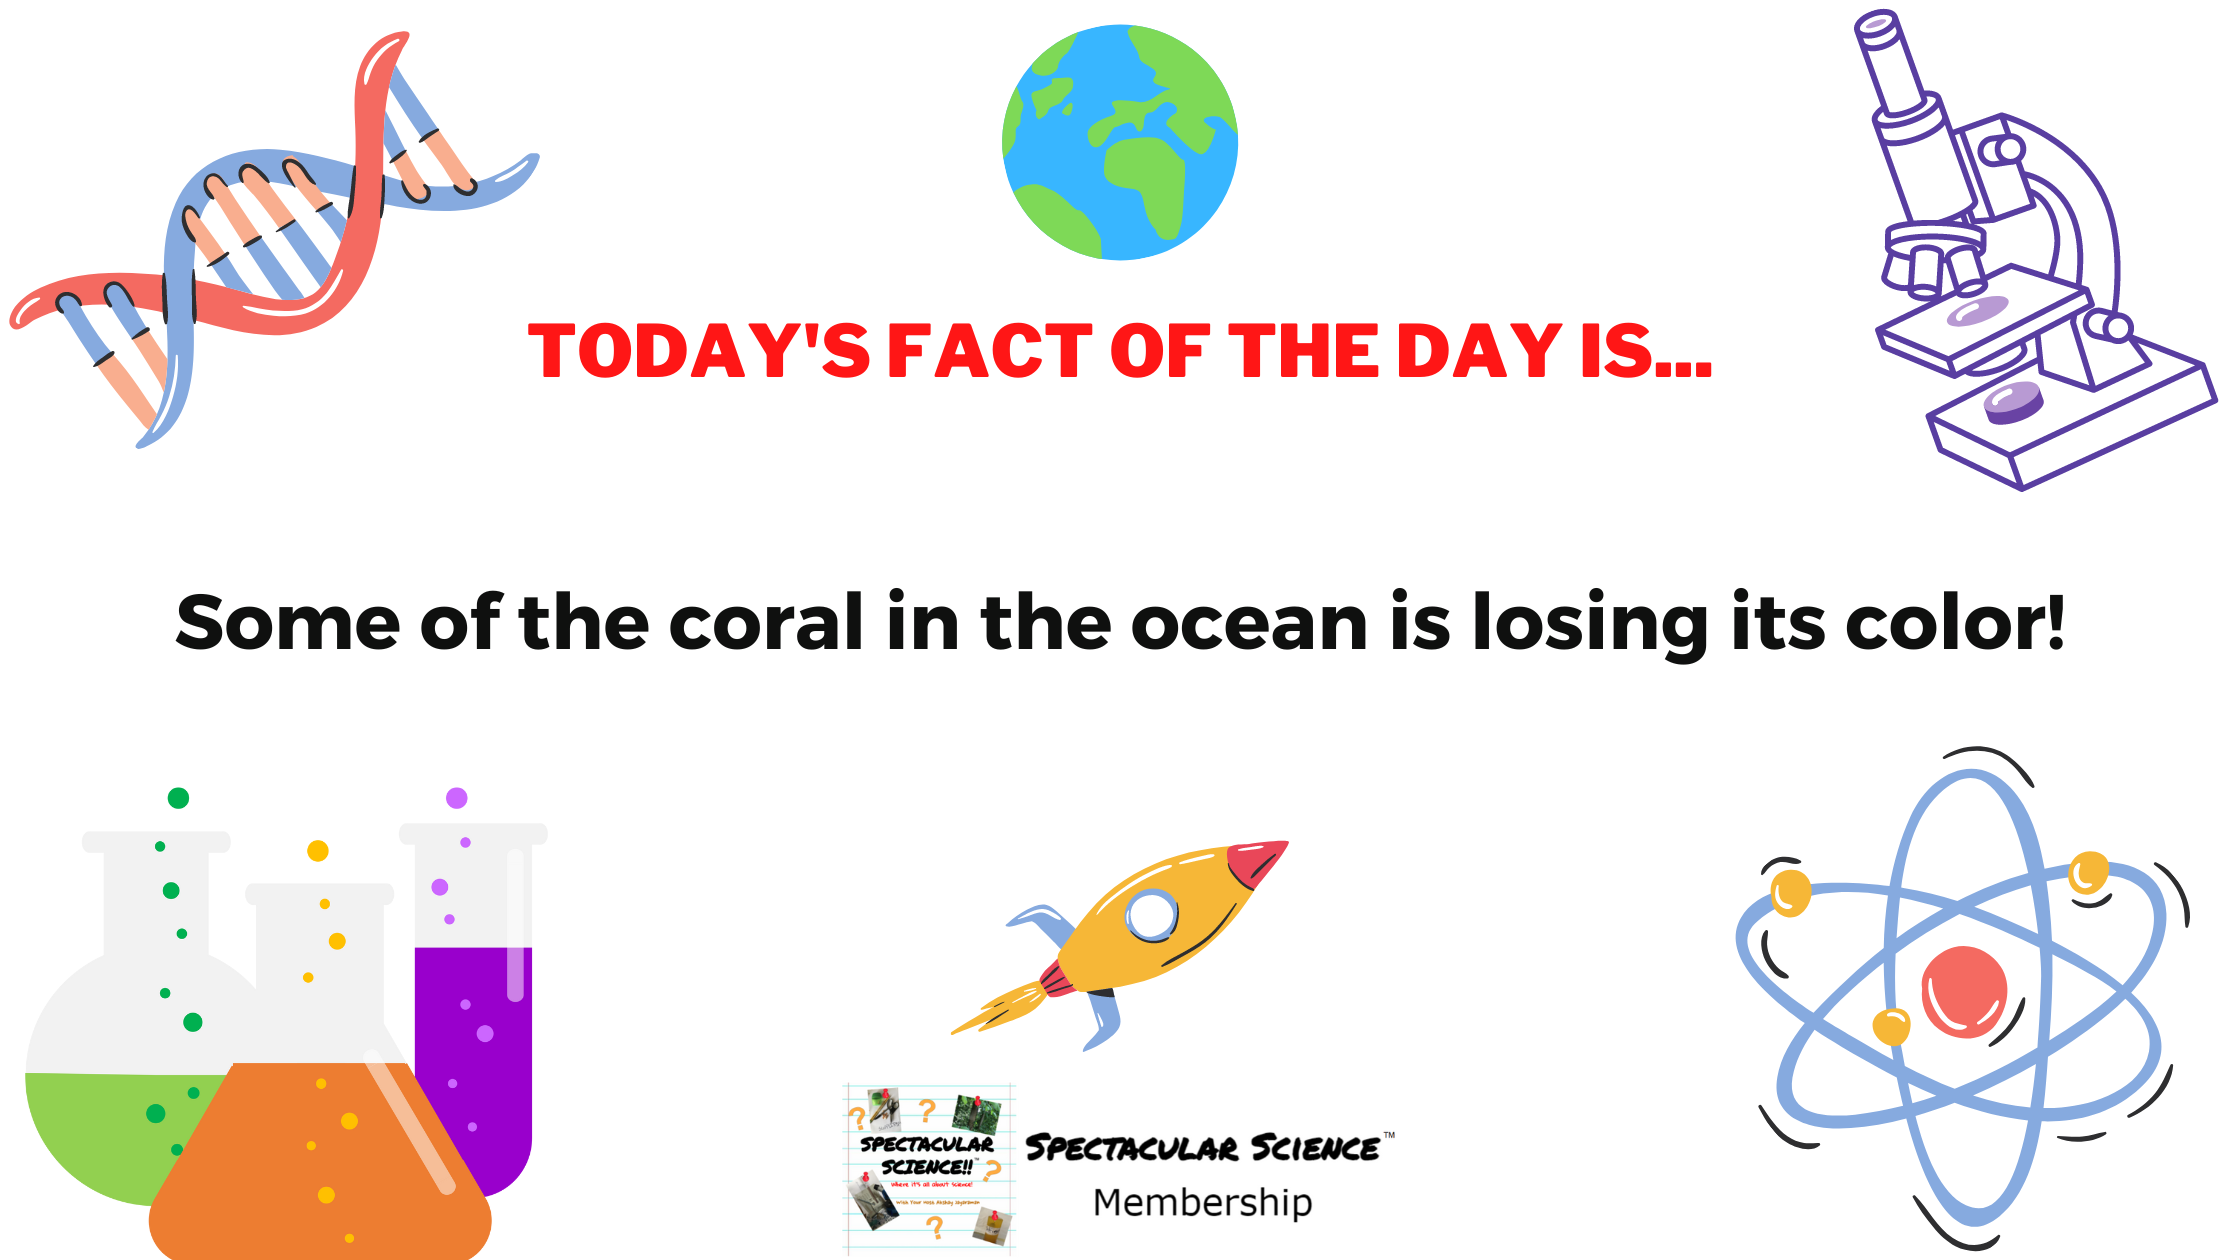 Fact of the Day Image June 17th